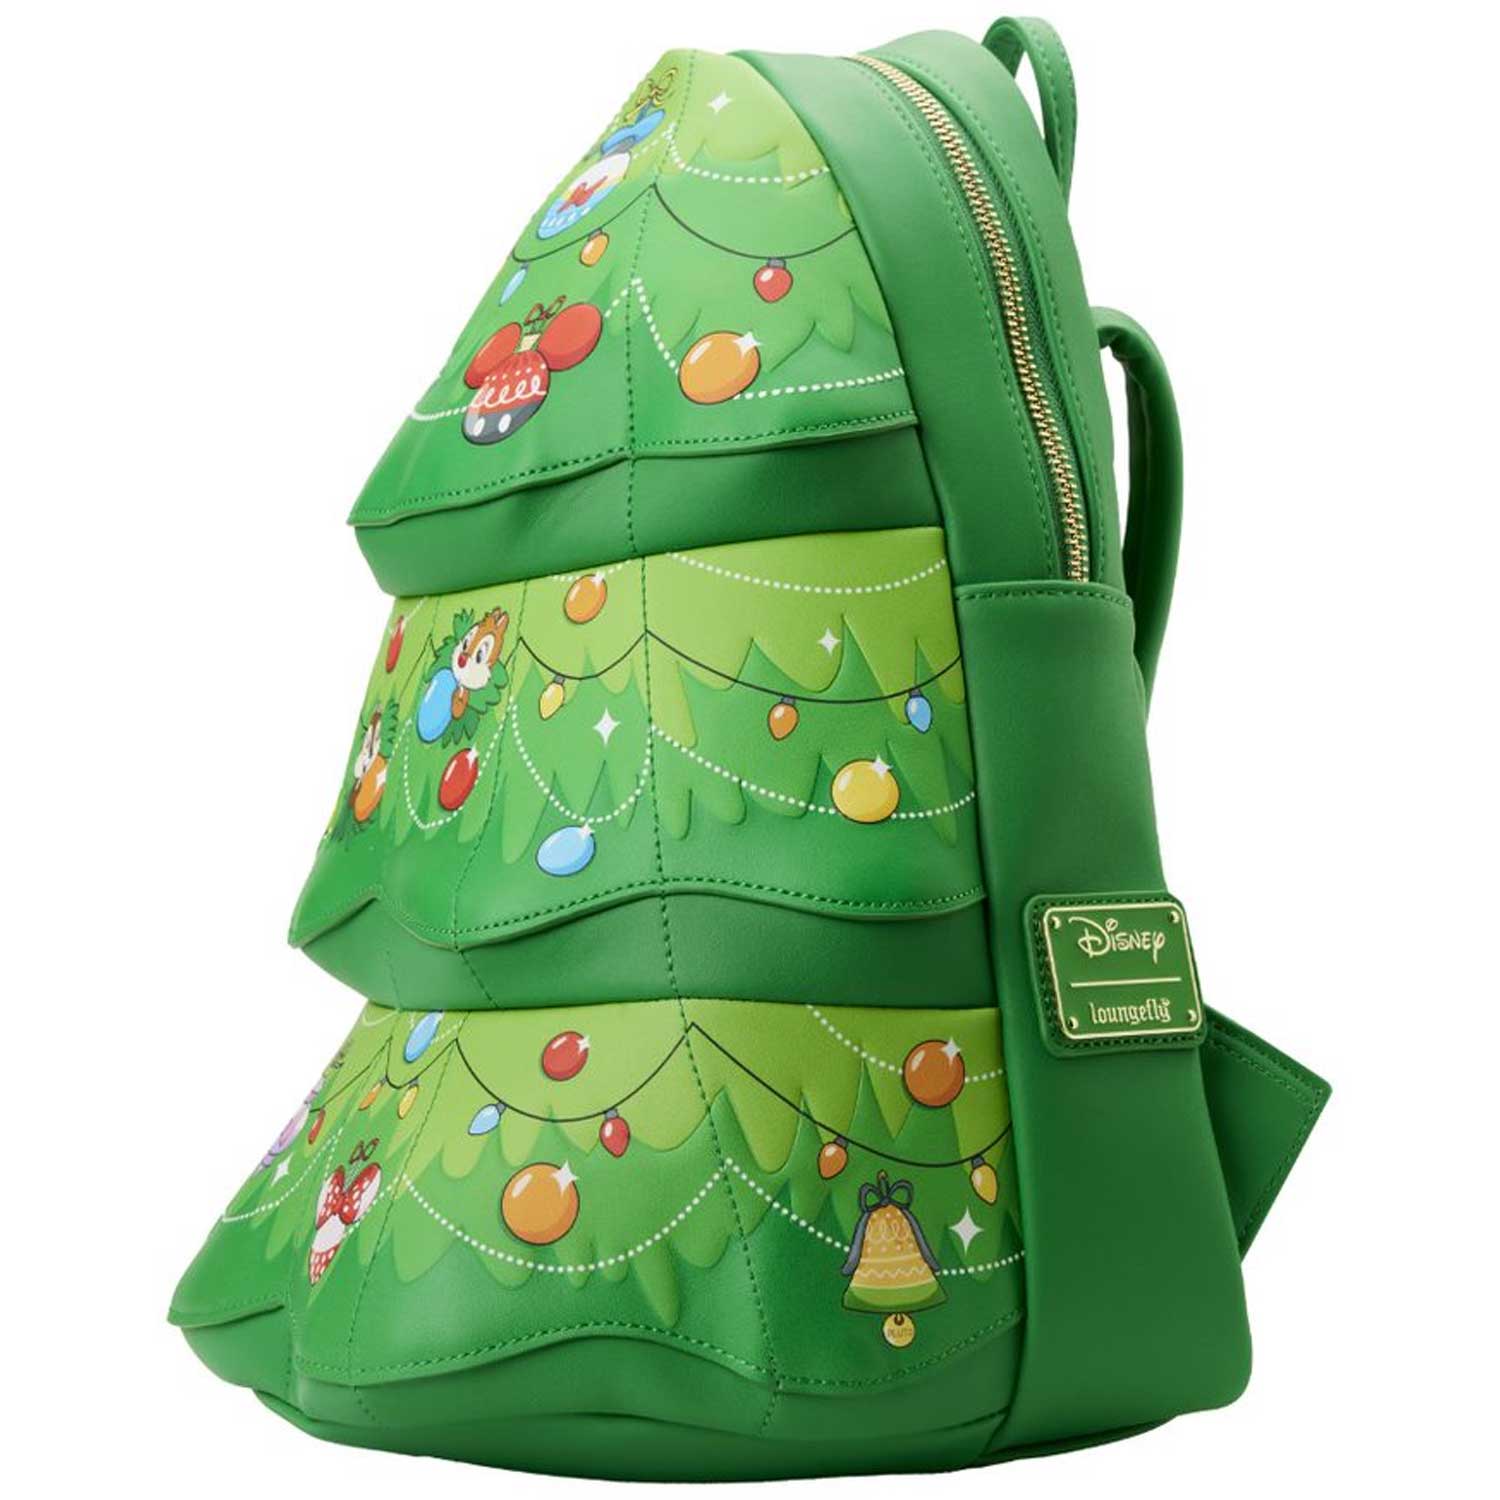 Loungefly x Disney Chip and Dale Figural Christmas Tree Mini Backpack